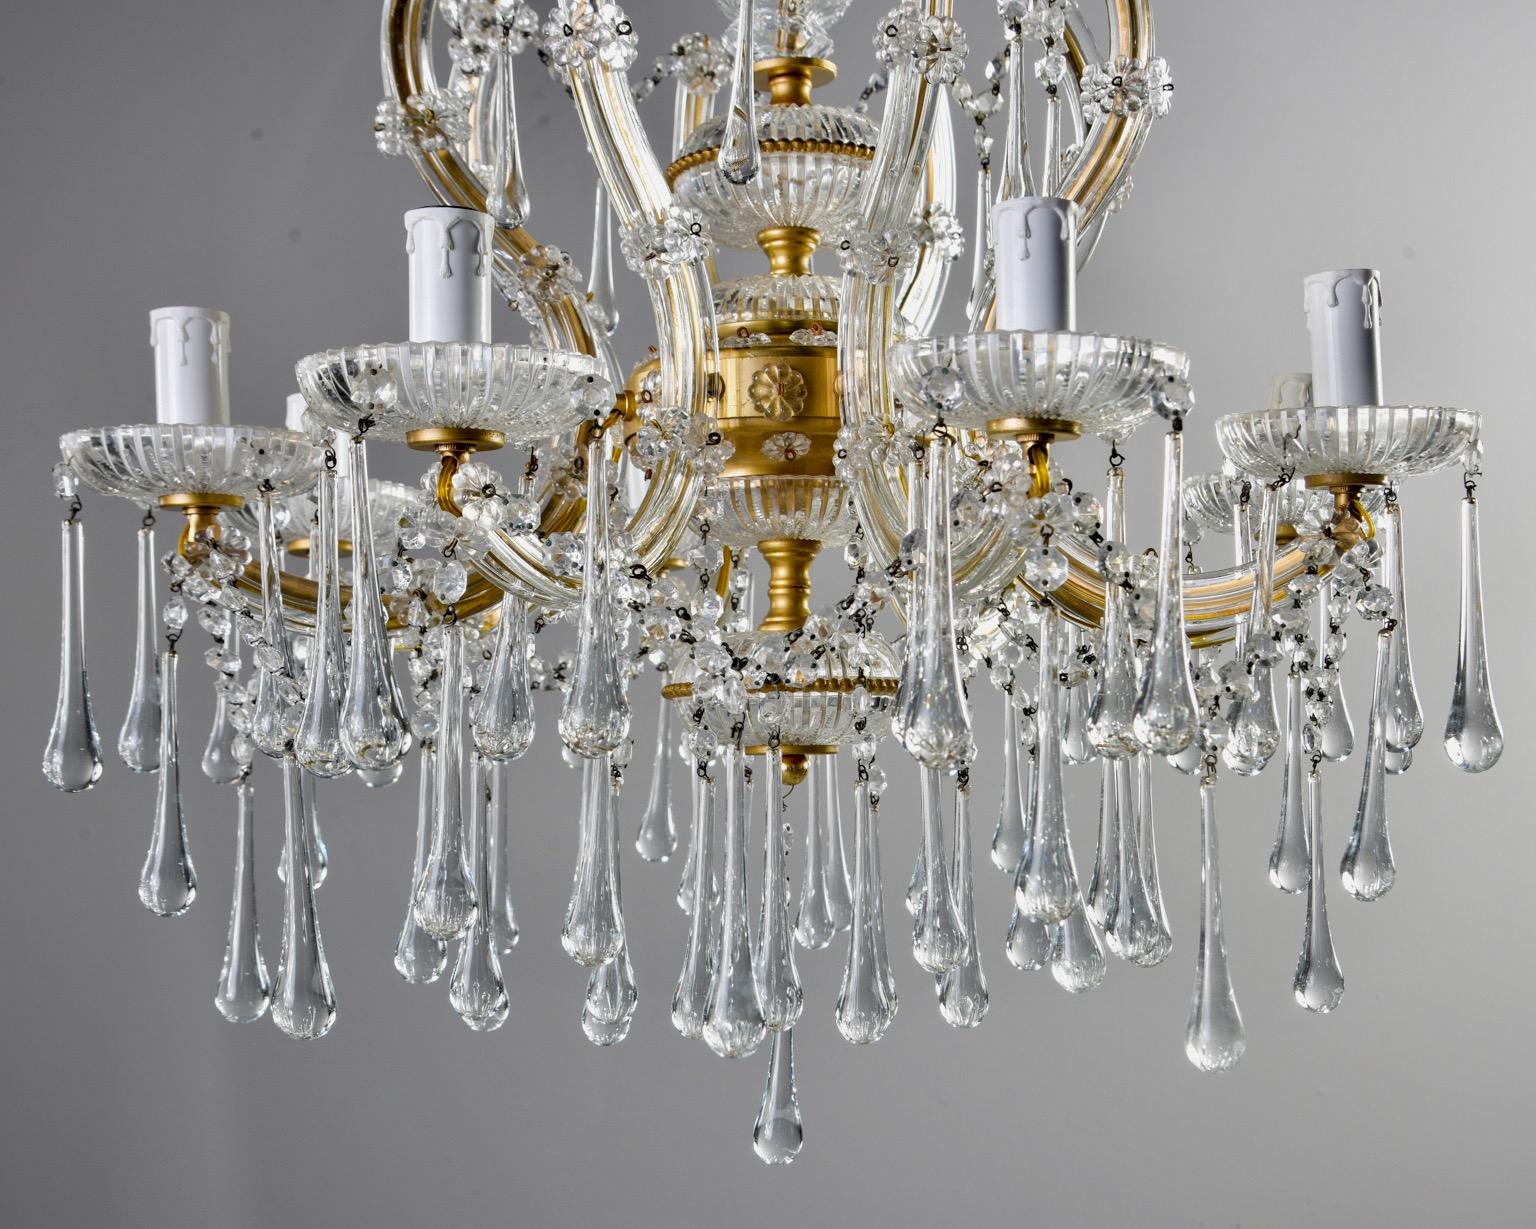 Italian crystal chandelier features eight arms with candle style lights and candelabra sized sockets, etched bobeches, gilded metal frame embellished with etched glass spacers, crystal beading and flowers, circa 1920s. Bobeches and arms are hung